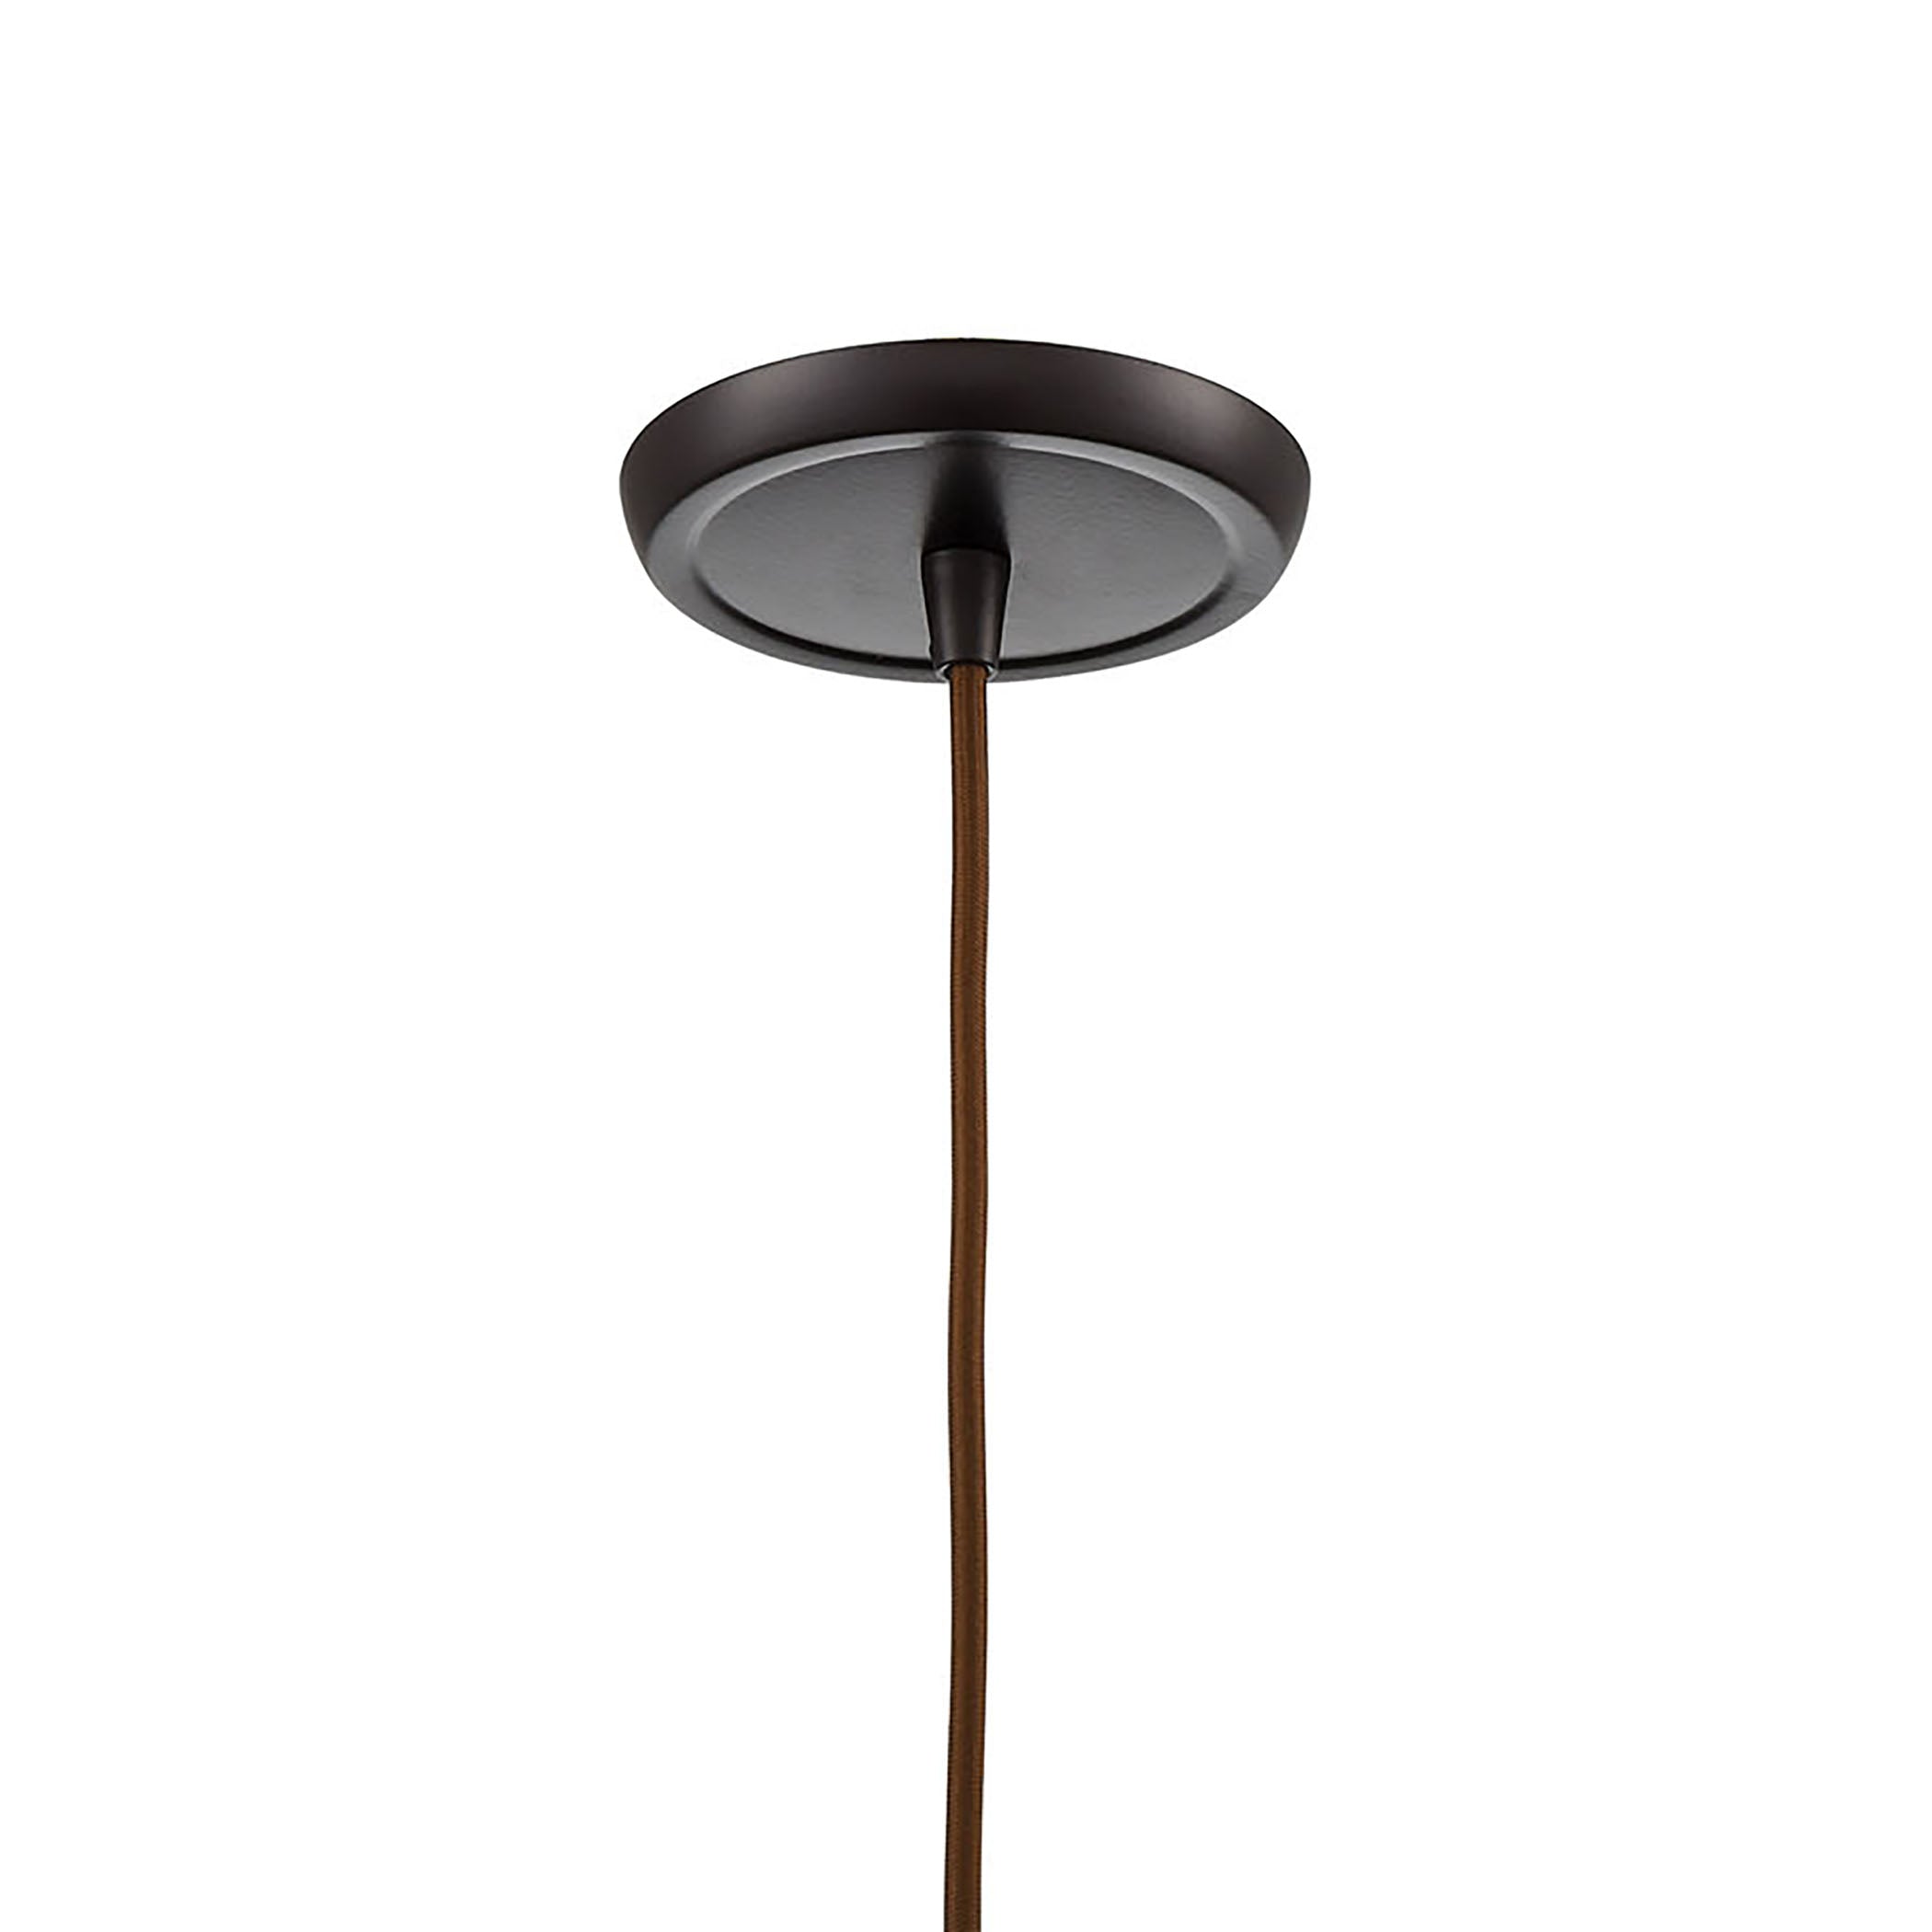 ELK Lighting 85257/1 Illuminessence 1-Light Mini Pendant in Oil Rubbed Bronze with Textured Gray Dichroic Glass